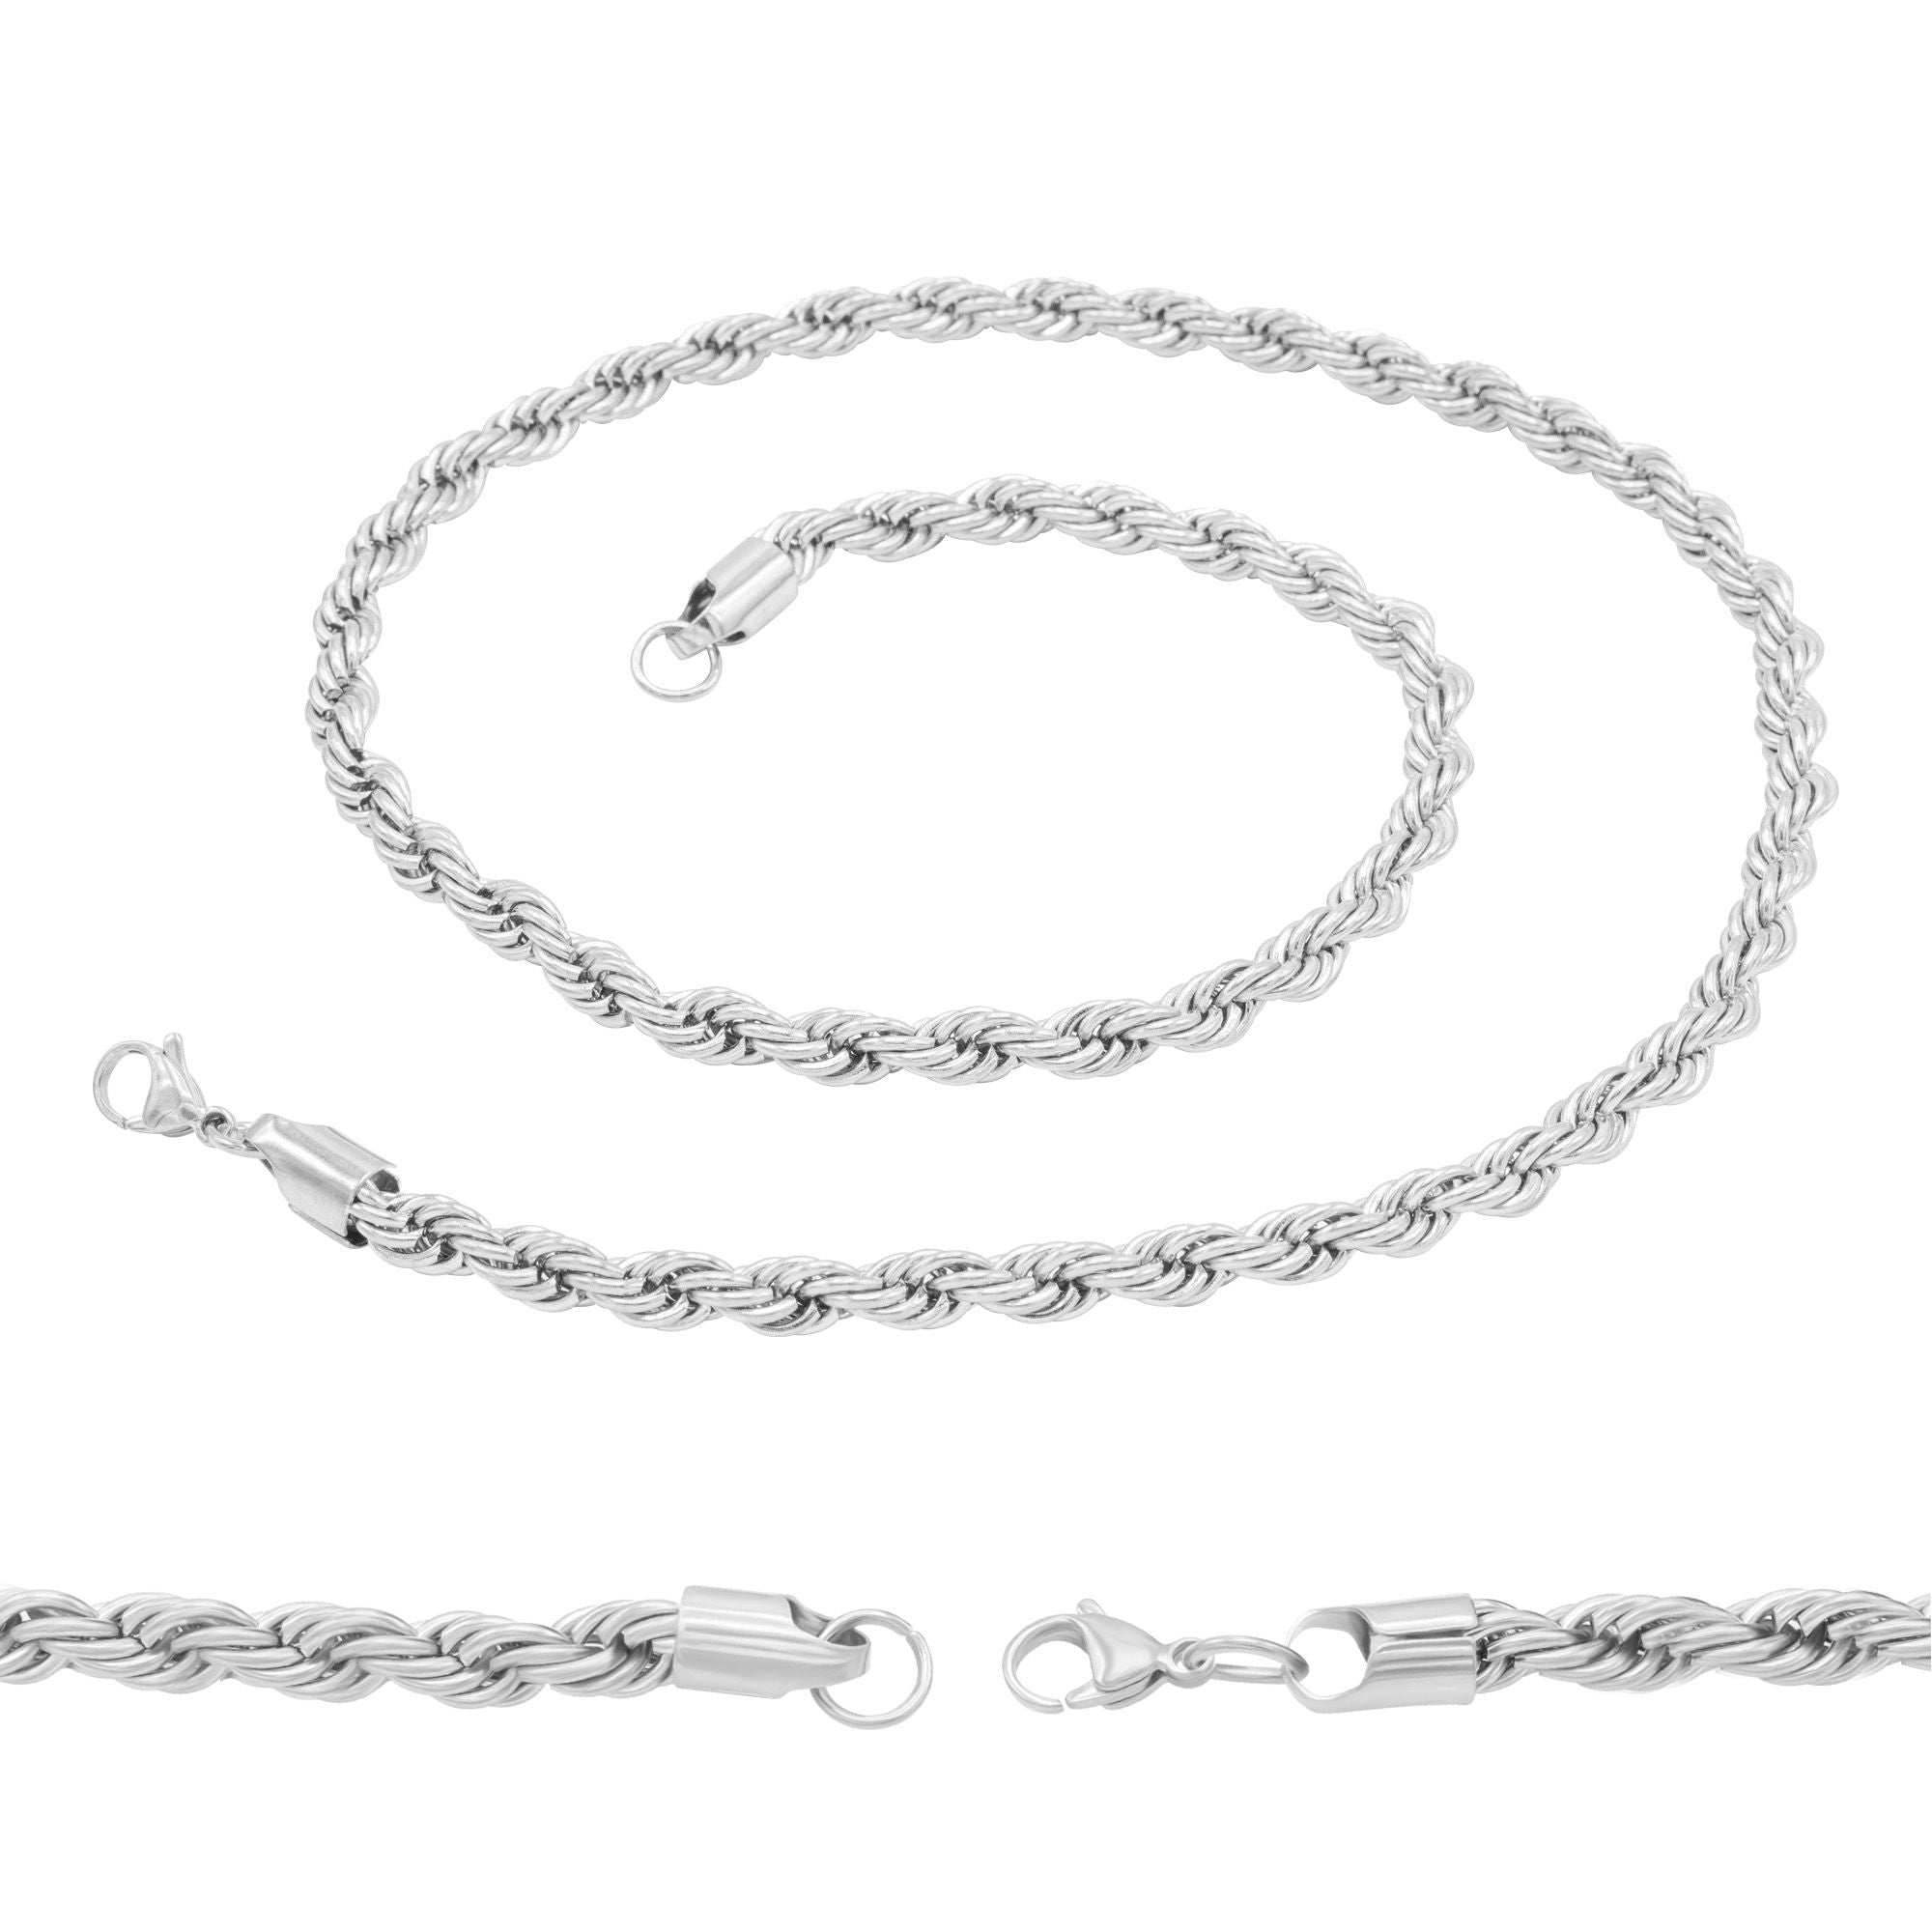 Men's Stainless Steel Rope Link Chain Necklace - 24 in